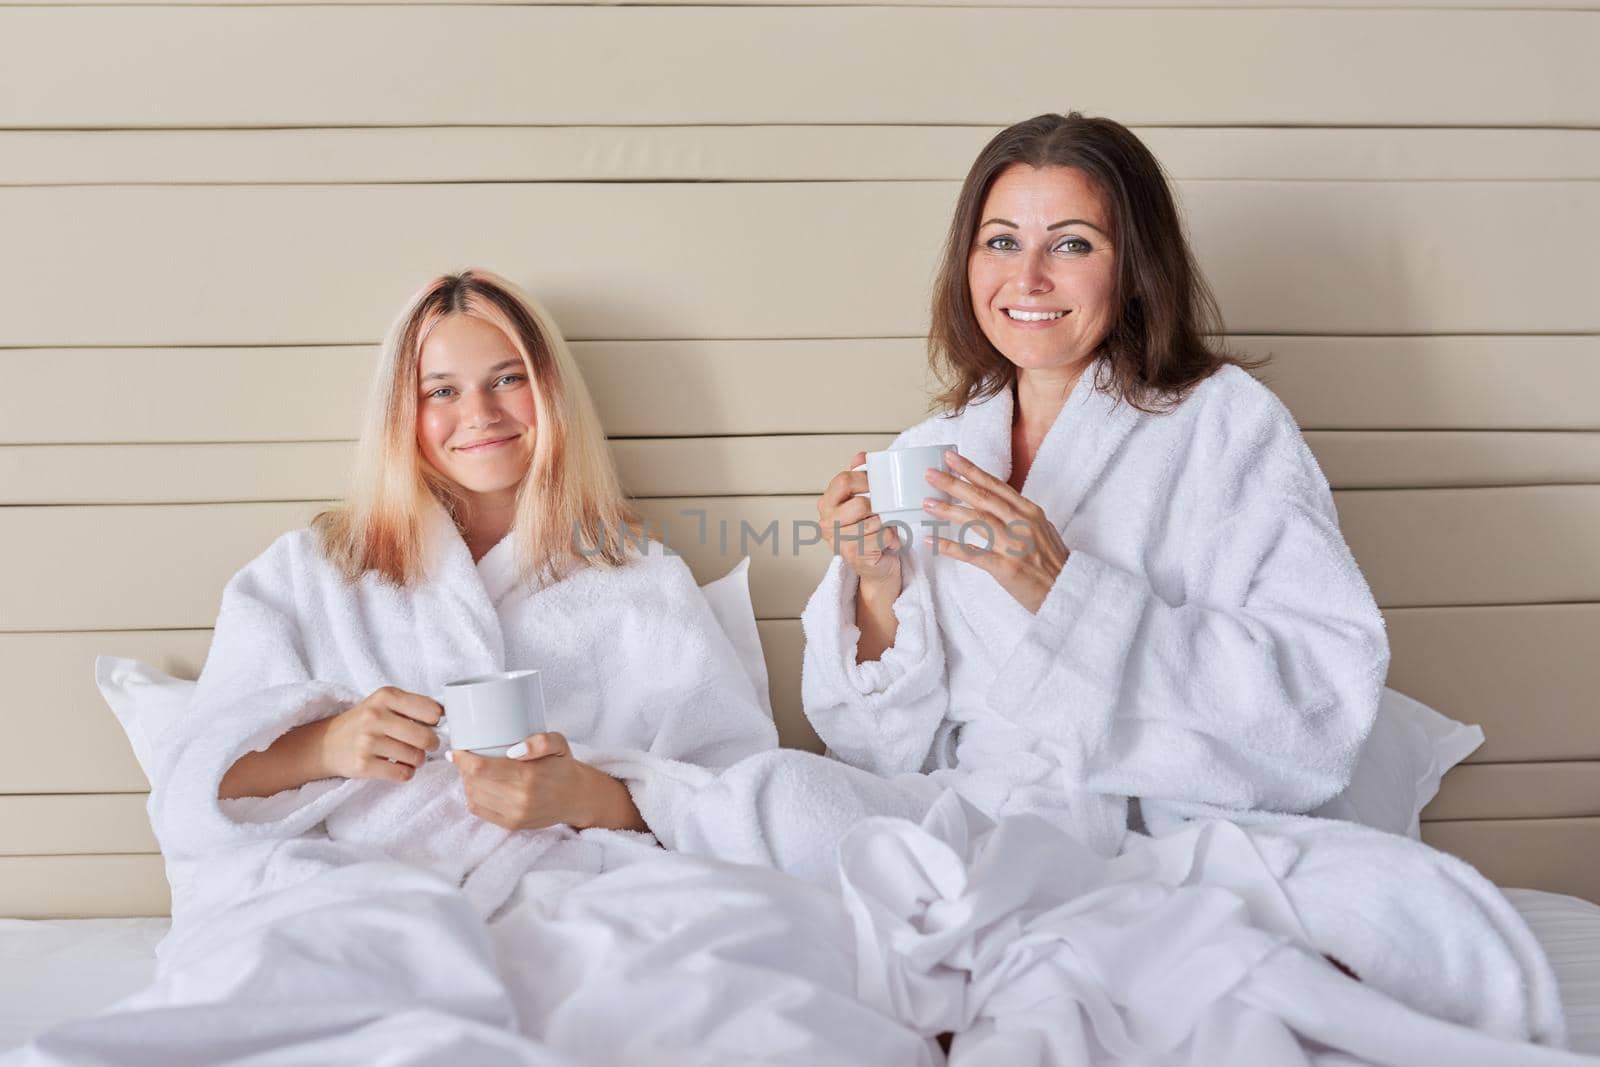 Happy mother and teenage daughter drinking coffee talking. Women in white bathrobes, resting sitting in bed, vacation together. Communication between parent and adolescent child, family, relationship